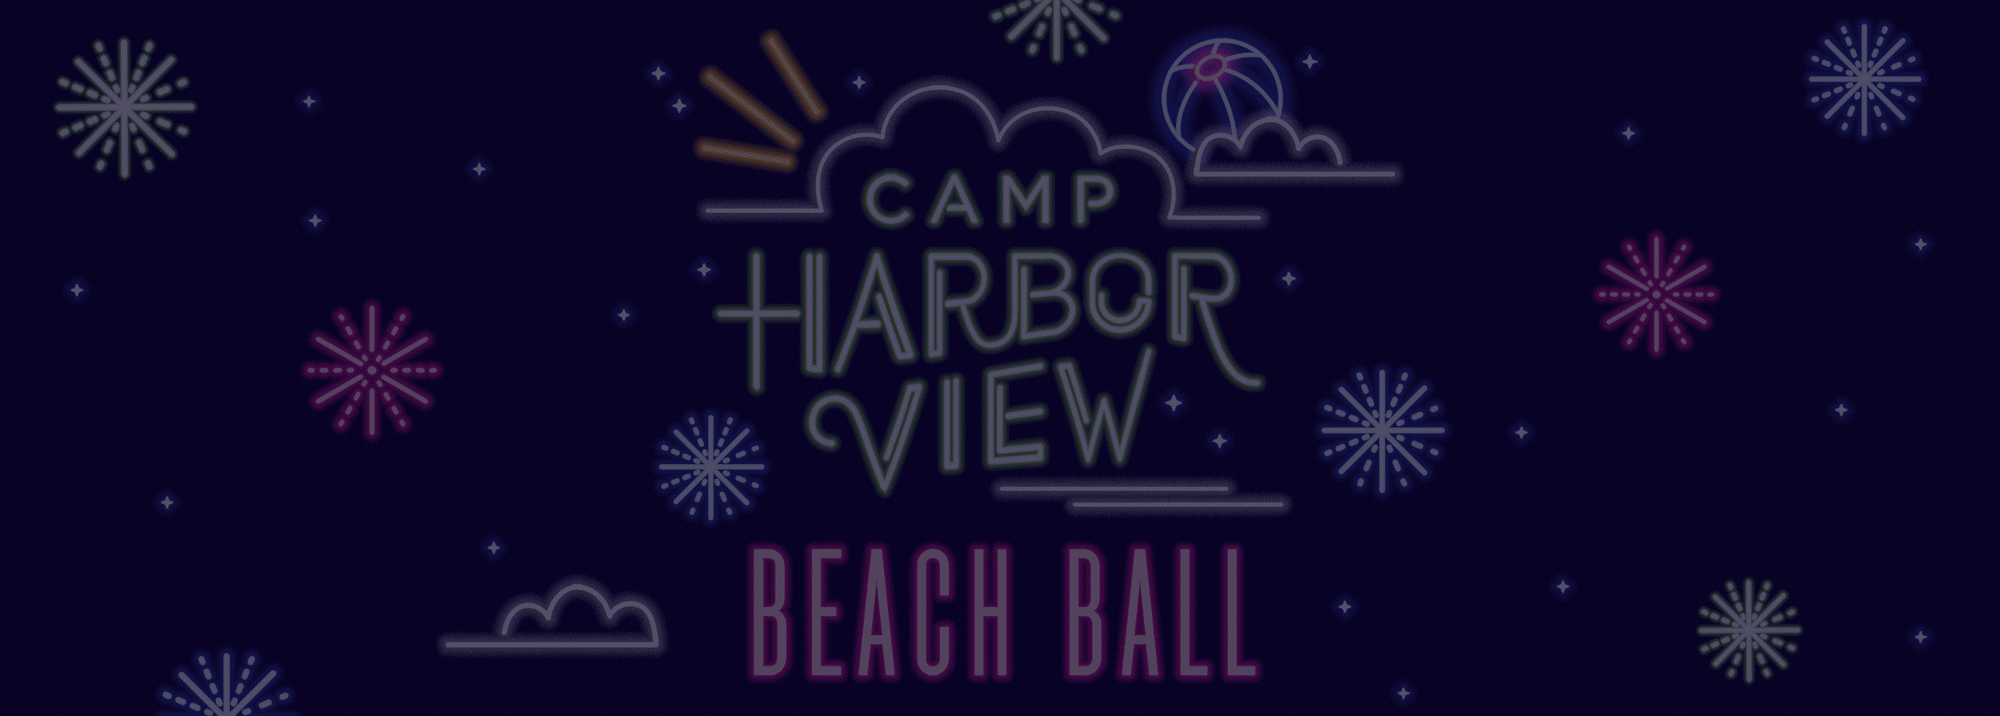 Camp Harbor View Beach Ball (animated graphic flashing neon letters, clouds, sun, and stars)